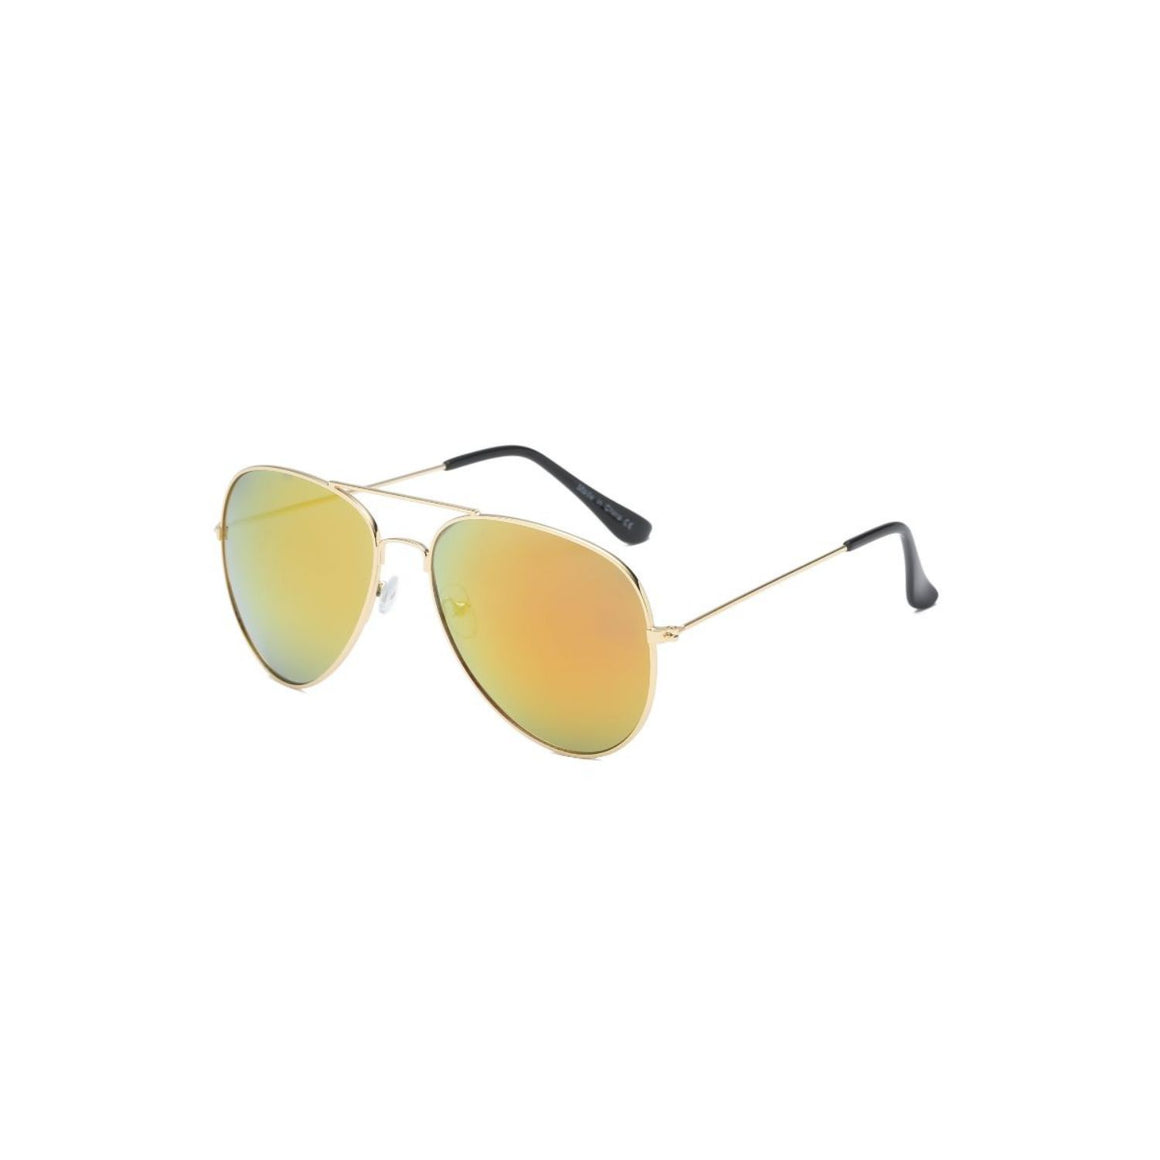 Buy First Copy Sunglasses Online India Ray Ban 1st Copy Sunglasses Online  Shopping Buy Replica Sunglasses Onl… | Sunglasses online, Sunglasses, Girl  with sunglasses